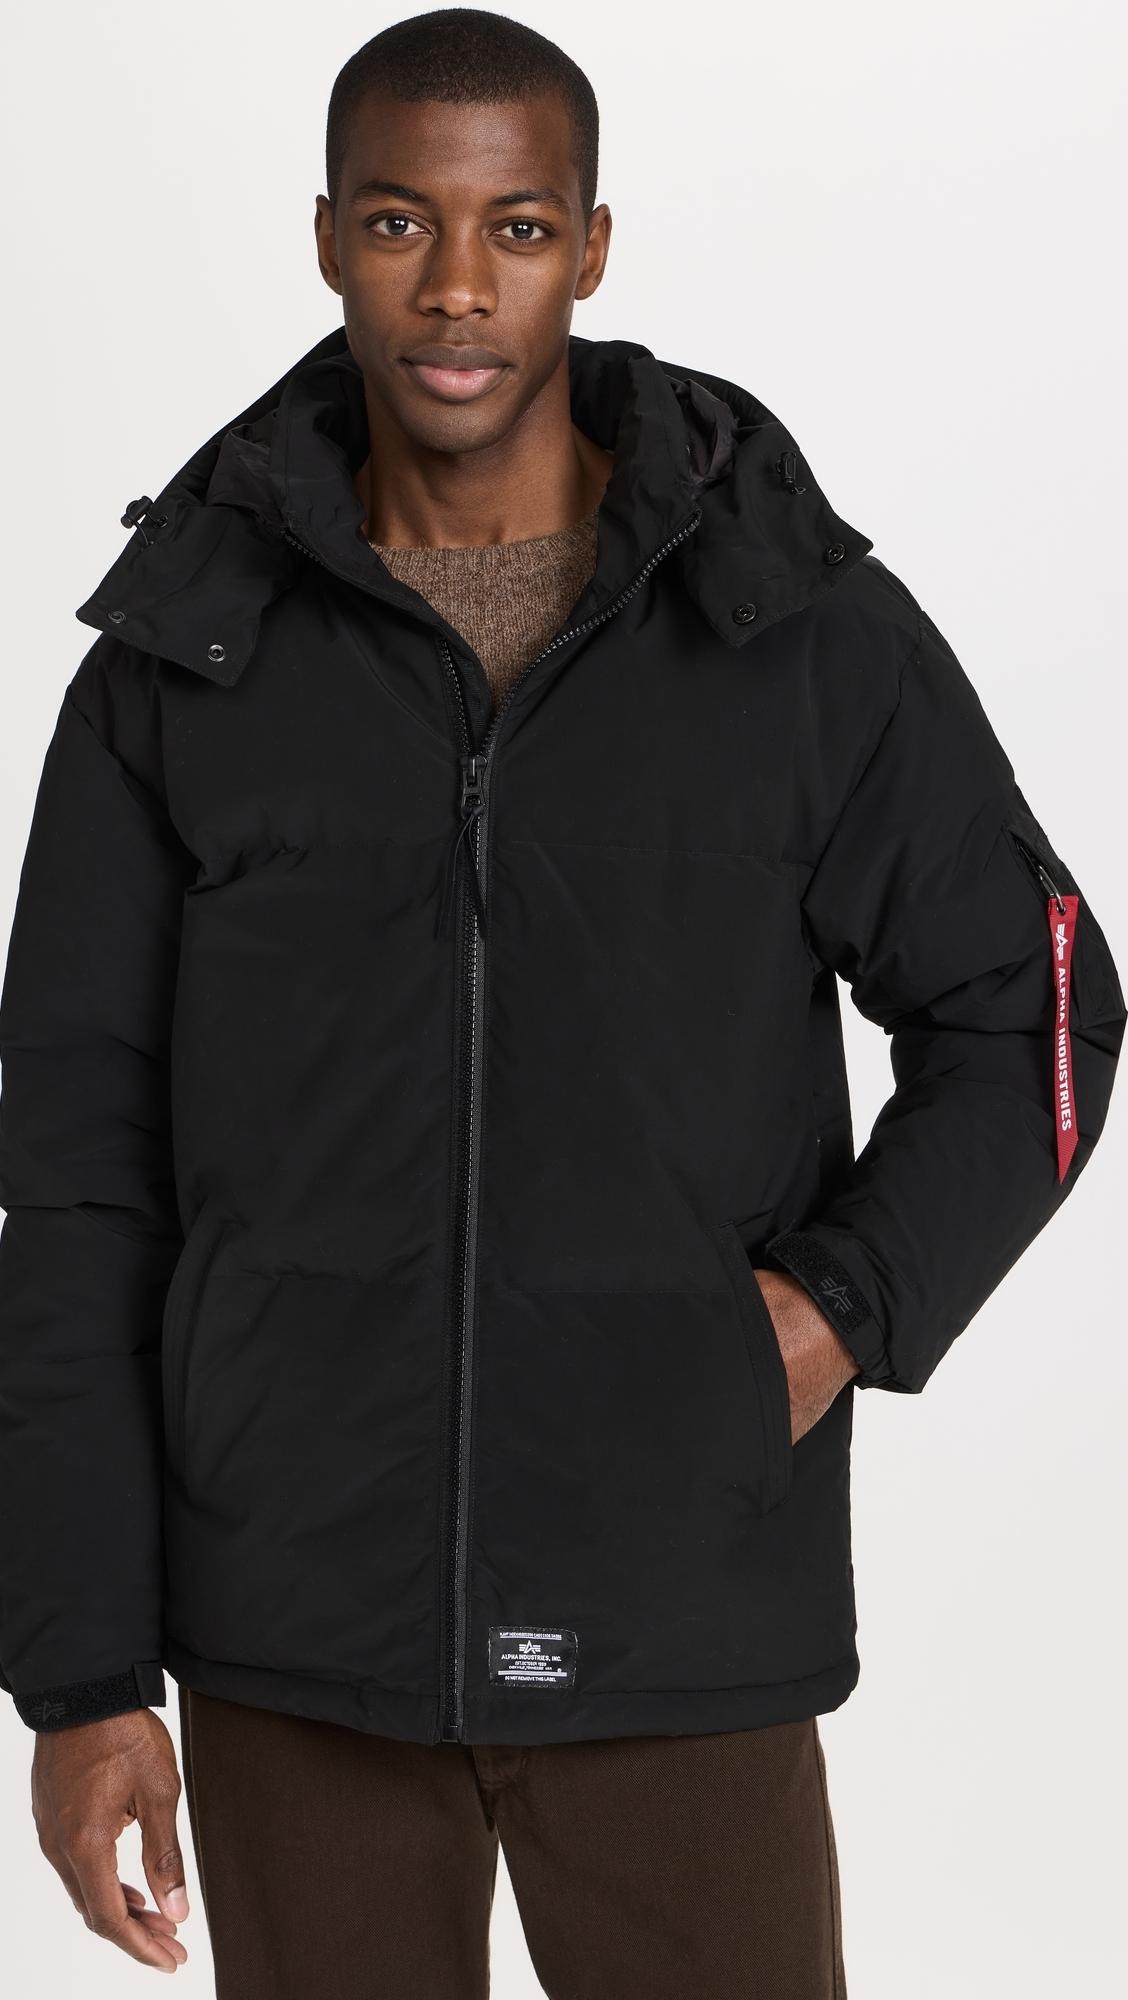 Back in Puffer Alpha Apha for Black X | Men Parka Industries Lyst Indutrie